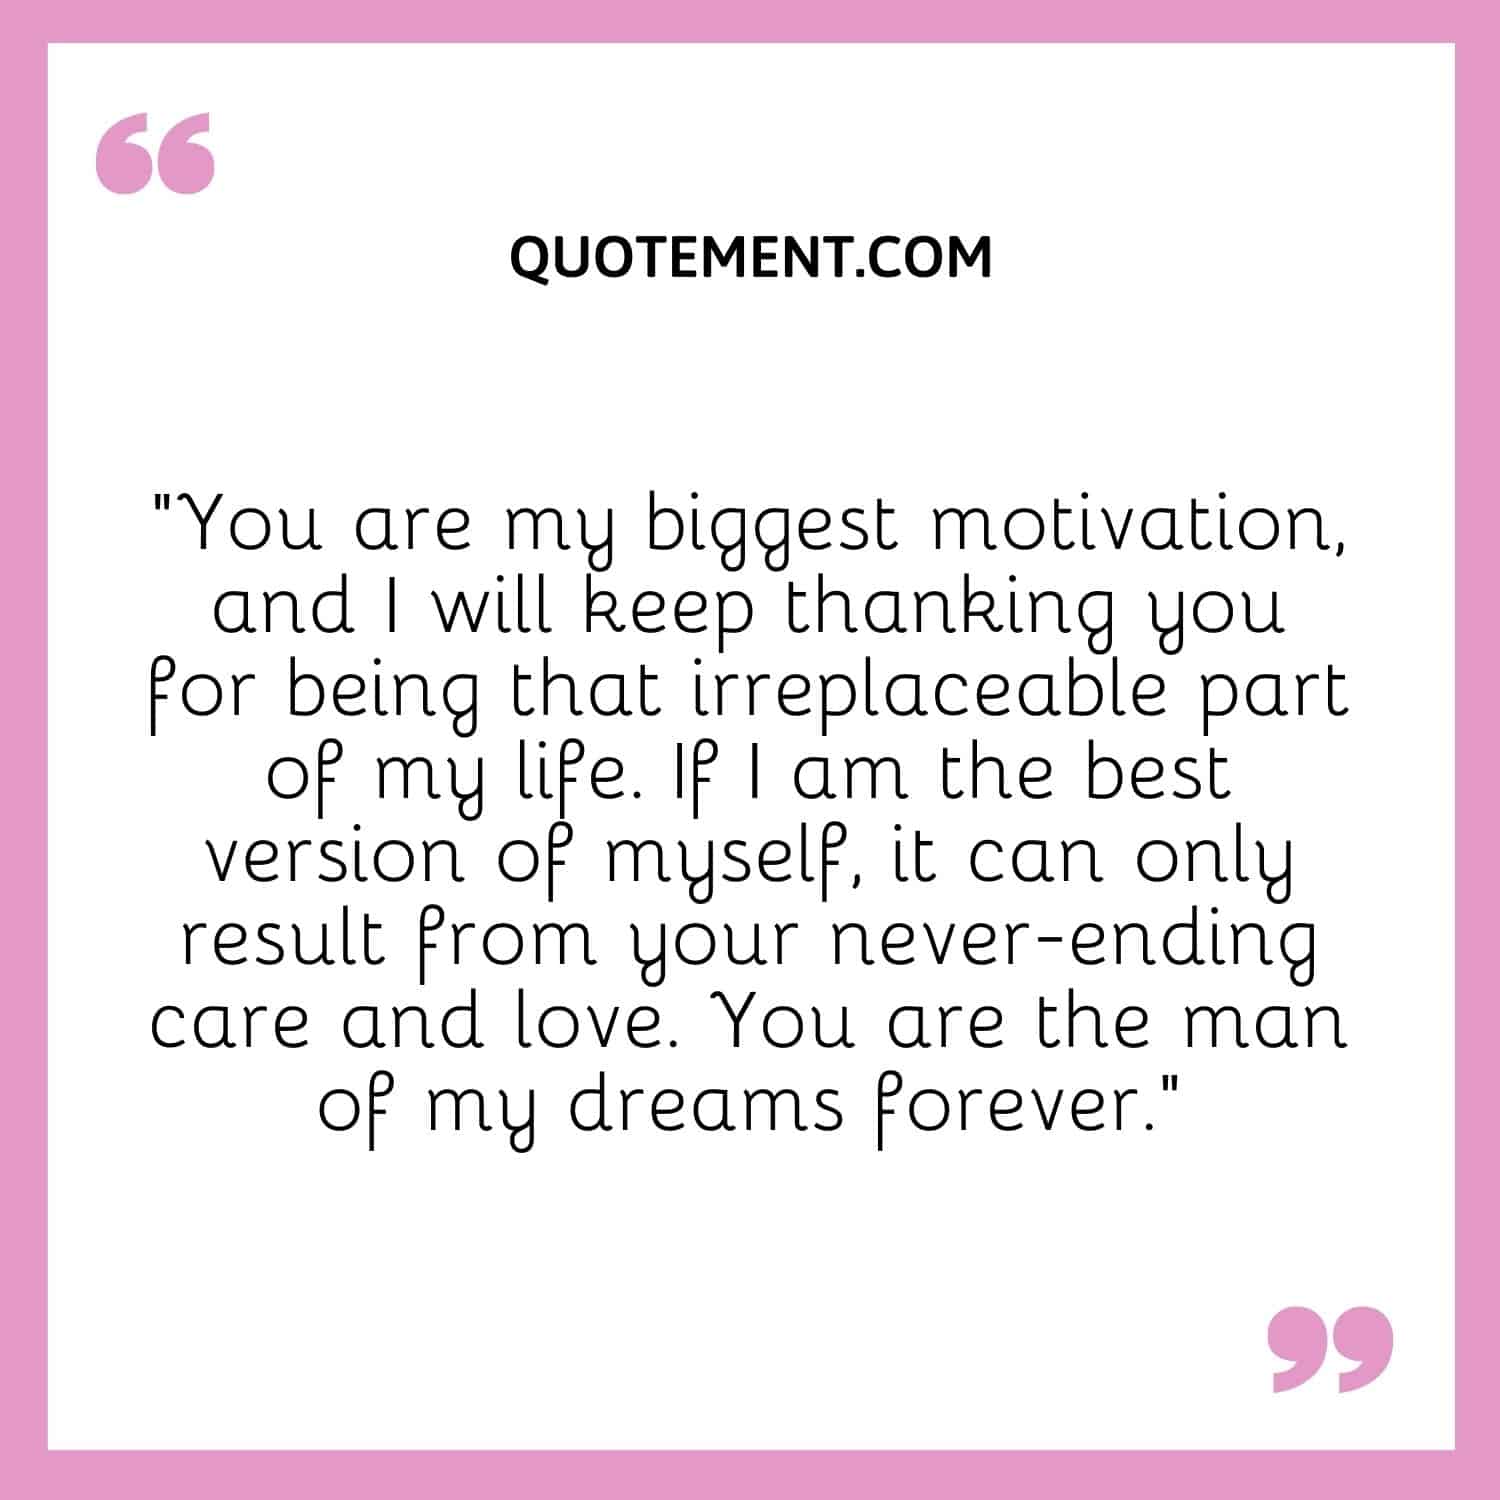 “You are my biggest motivation, and I will keep thanking you for being that irreplaceable part of my life.